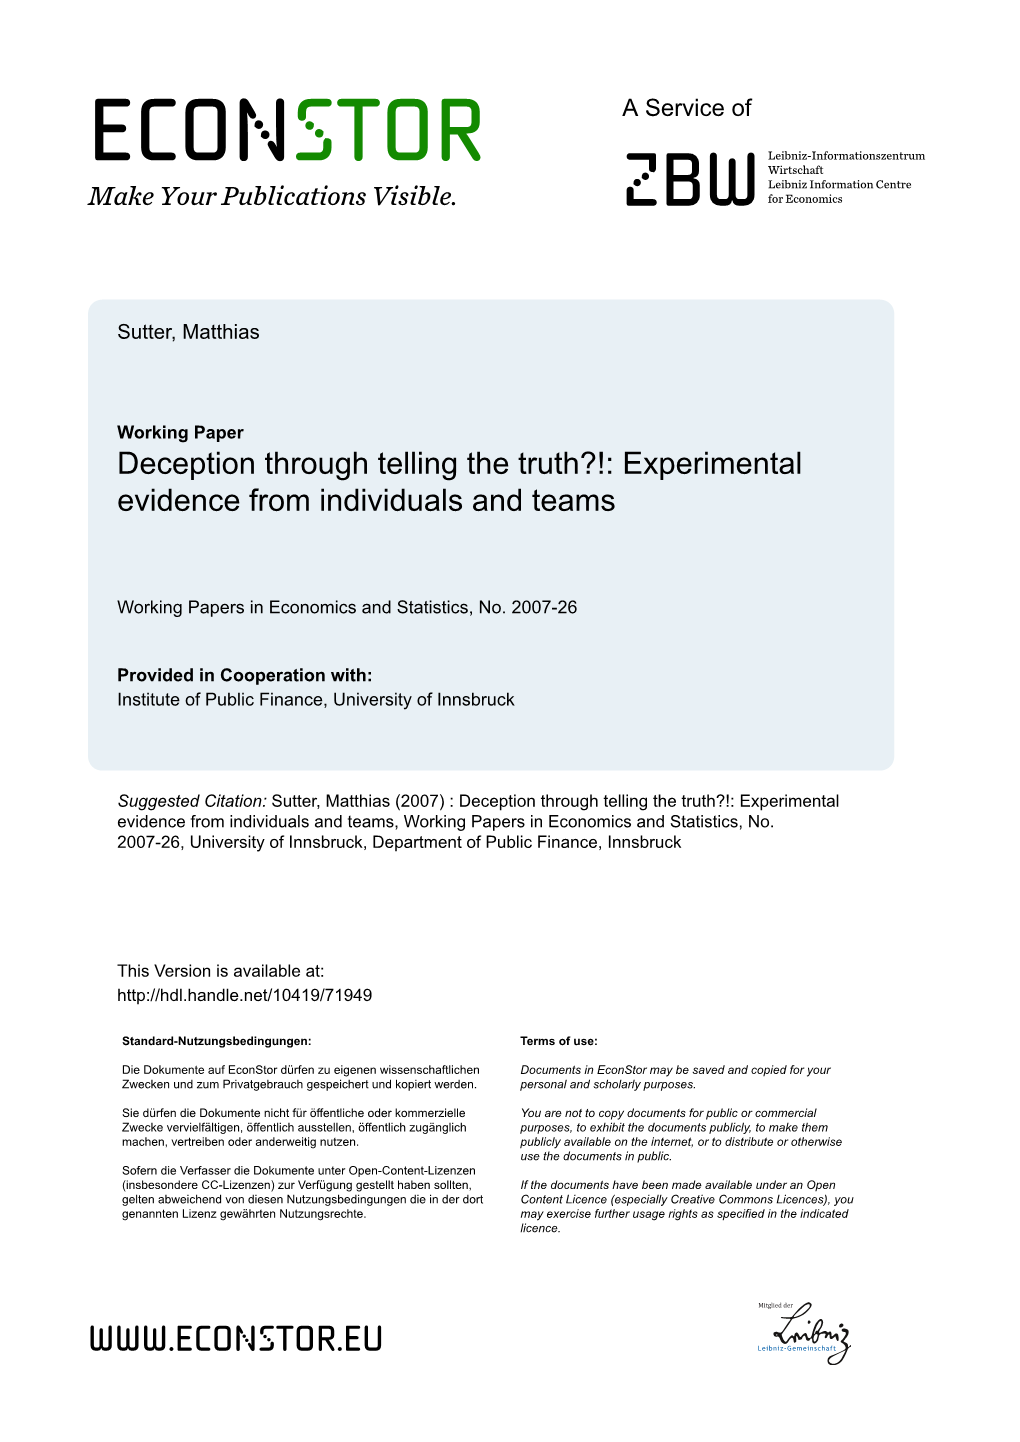 Deception Through Telling the Truth?!: Experimental Evidence from Individuals and Teams